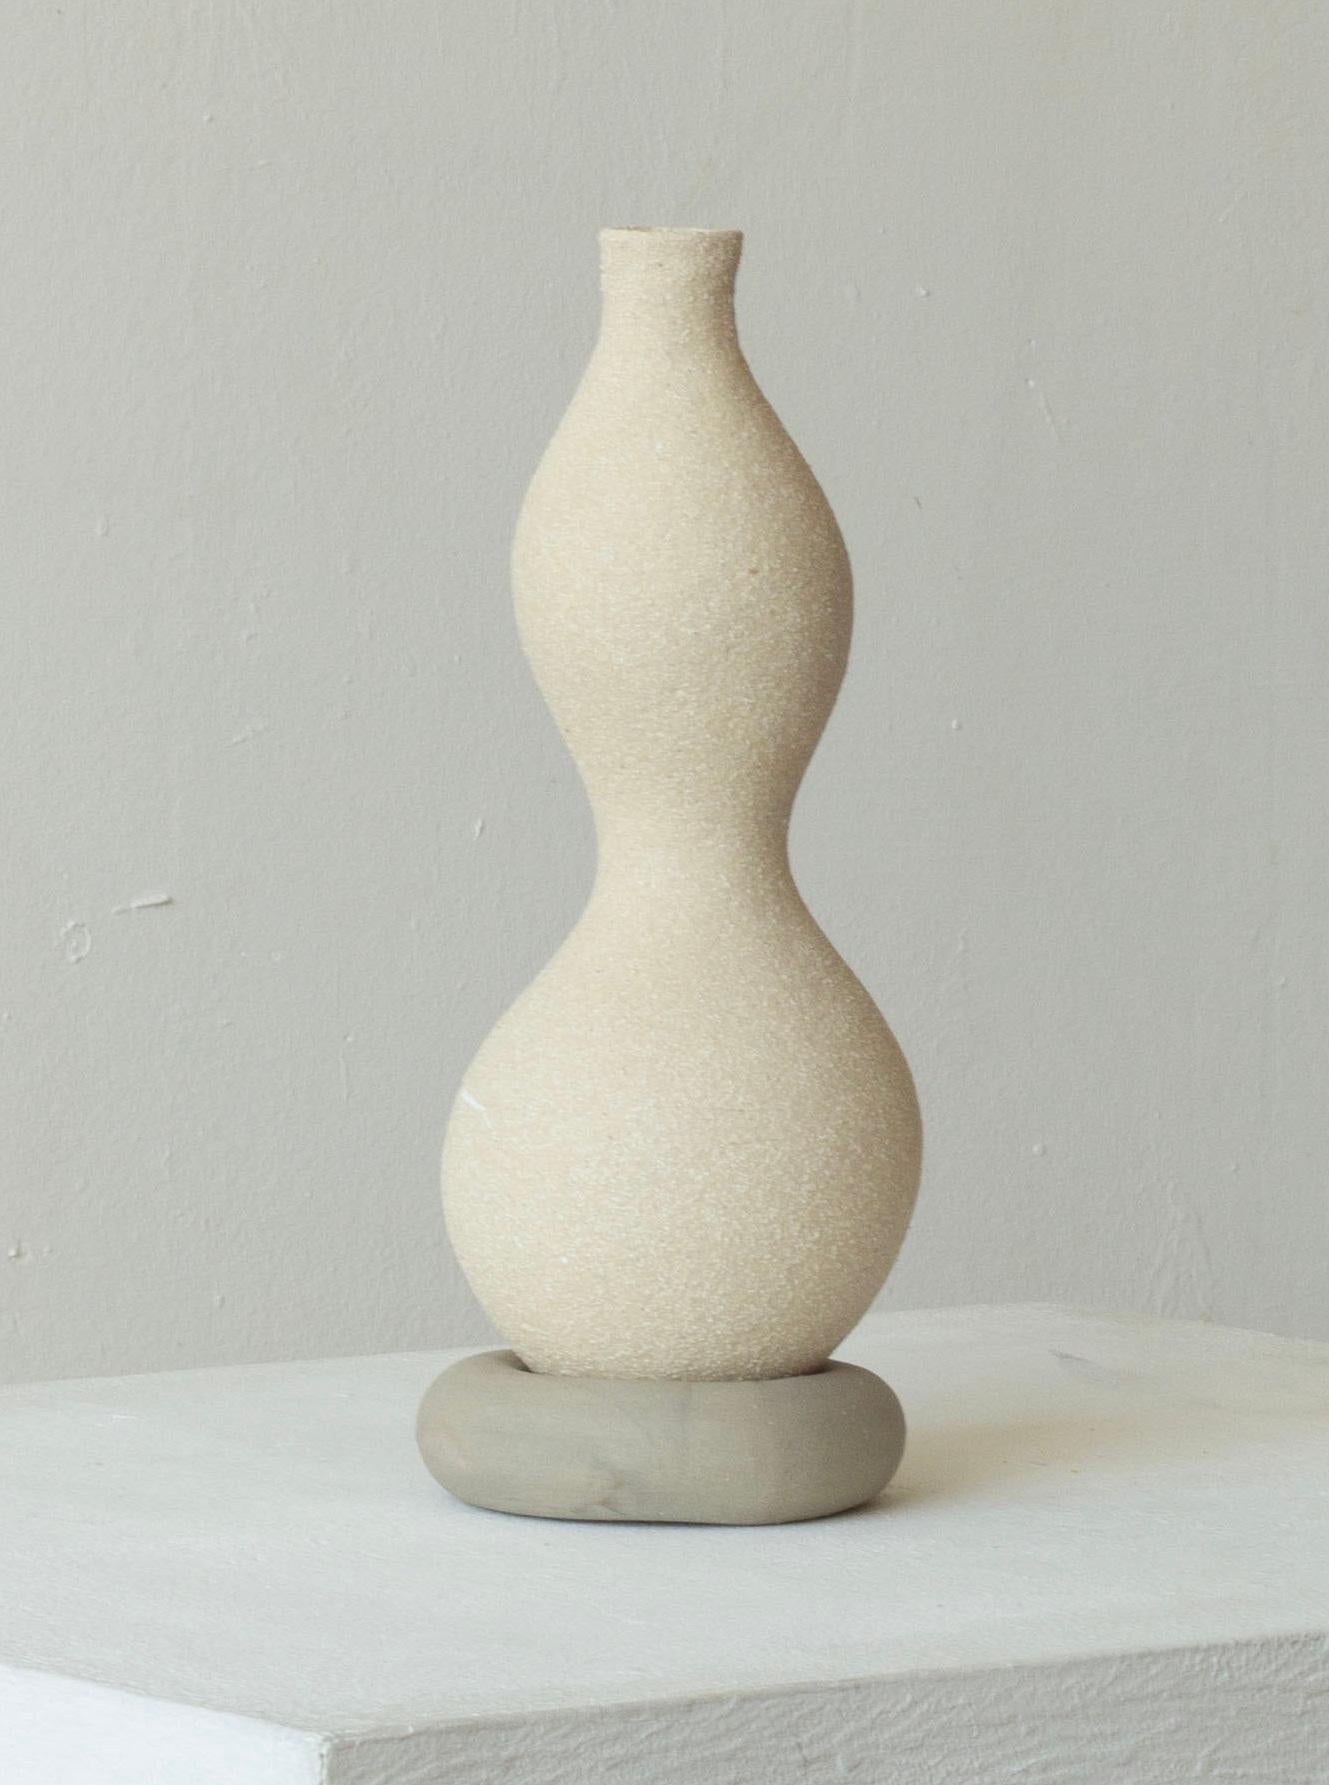 Woman Cracked But Healed 217 by Karina Smagulova
One of a Kind.
Dimensions: Ø 9 x H 23 cm.
Materials: White and grey stoneware and epoxy.
​
With an Armenian and Kazakhstan heritage, Karina Smagulova was born in Greece in 1995 and graduated with a